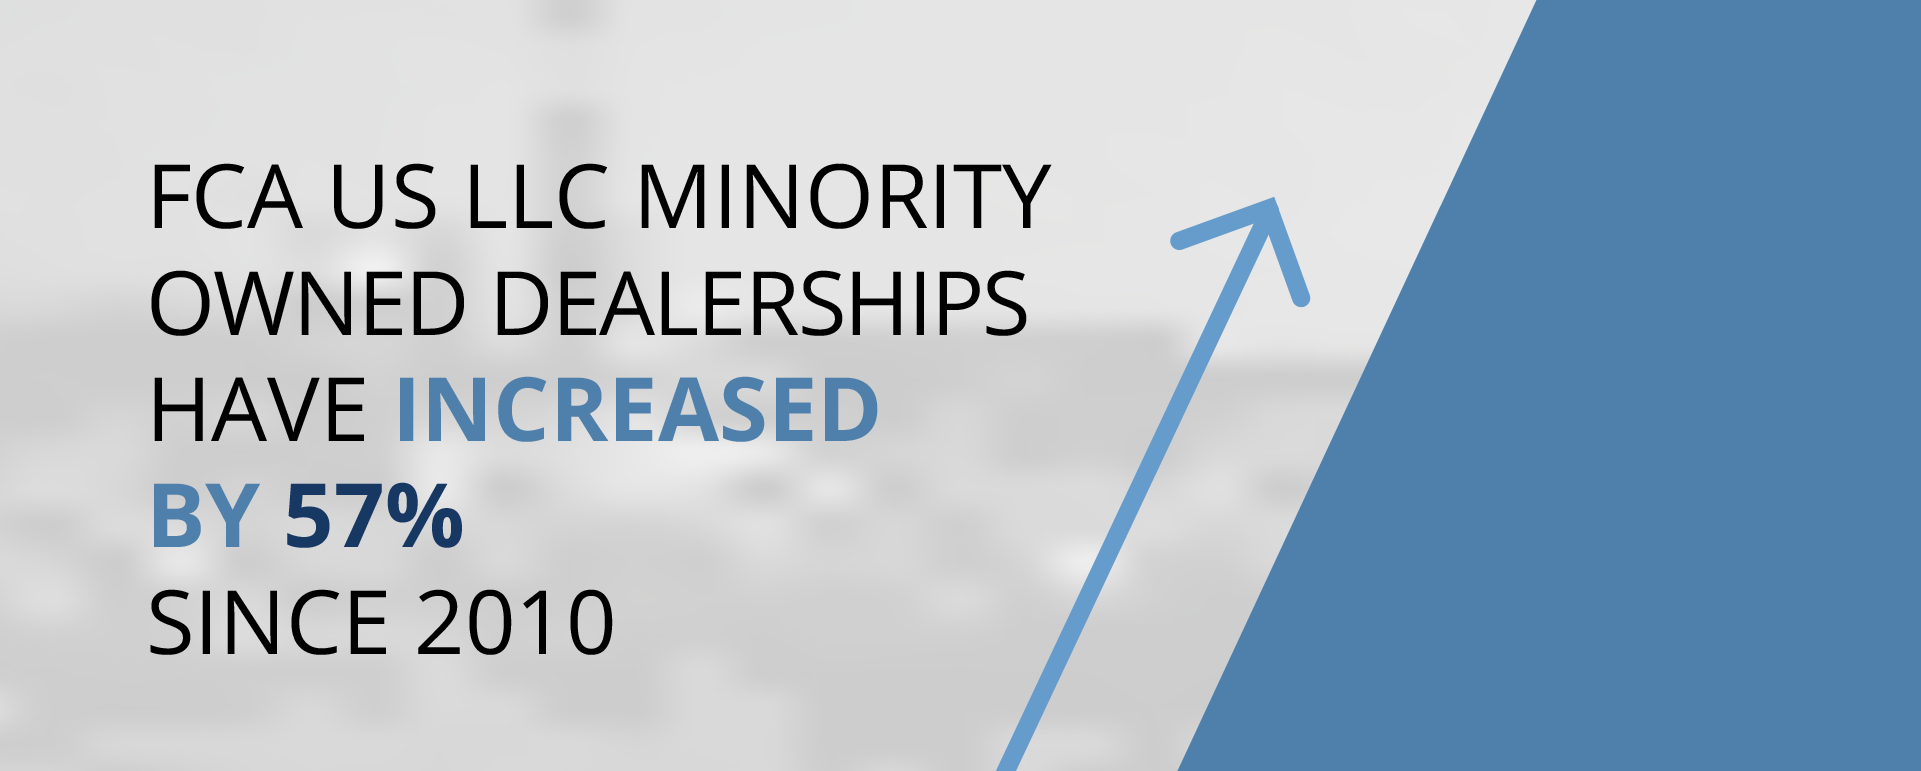 FCA US LLC's minority owned dealerships have increased by 57% since 2010